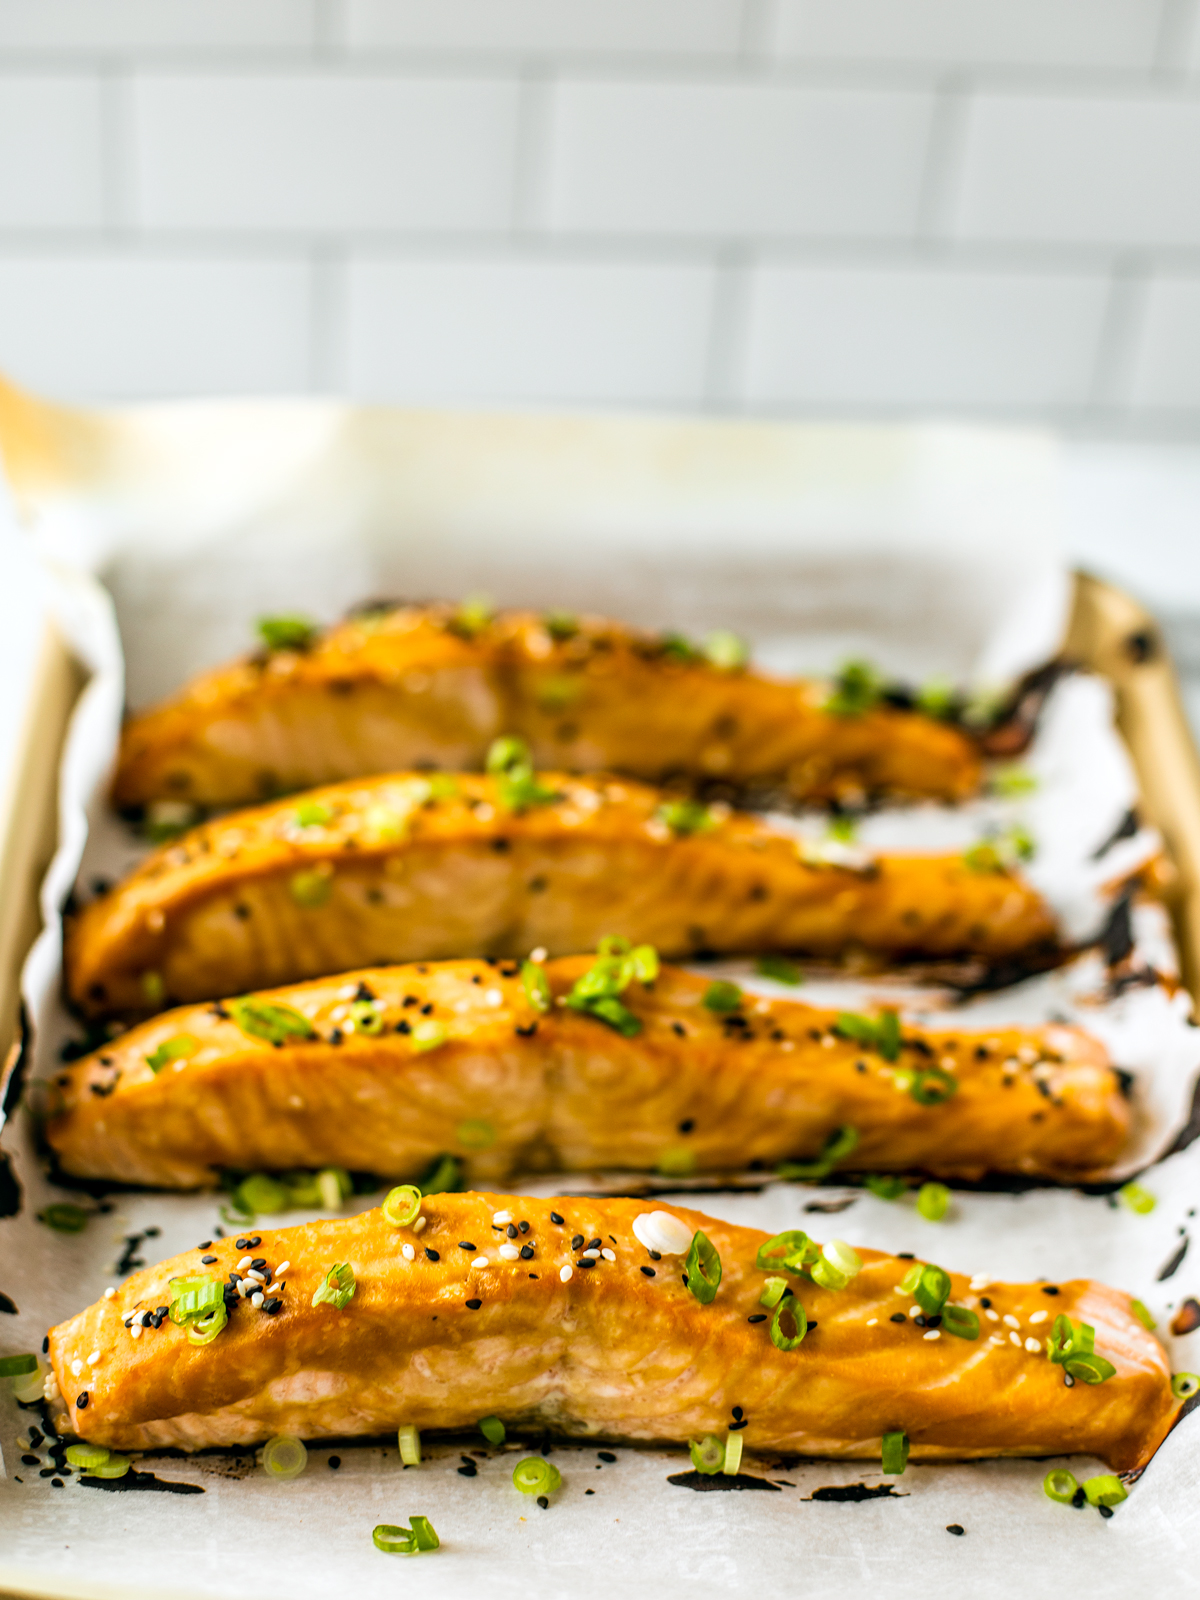 Four salmon filets on a baking sheet with parchment, glazed and garnished with sesame seeds and scallions; a white tile backsplash in the background.